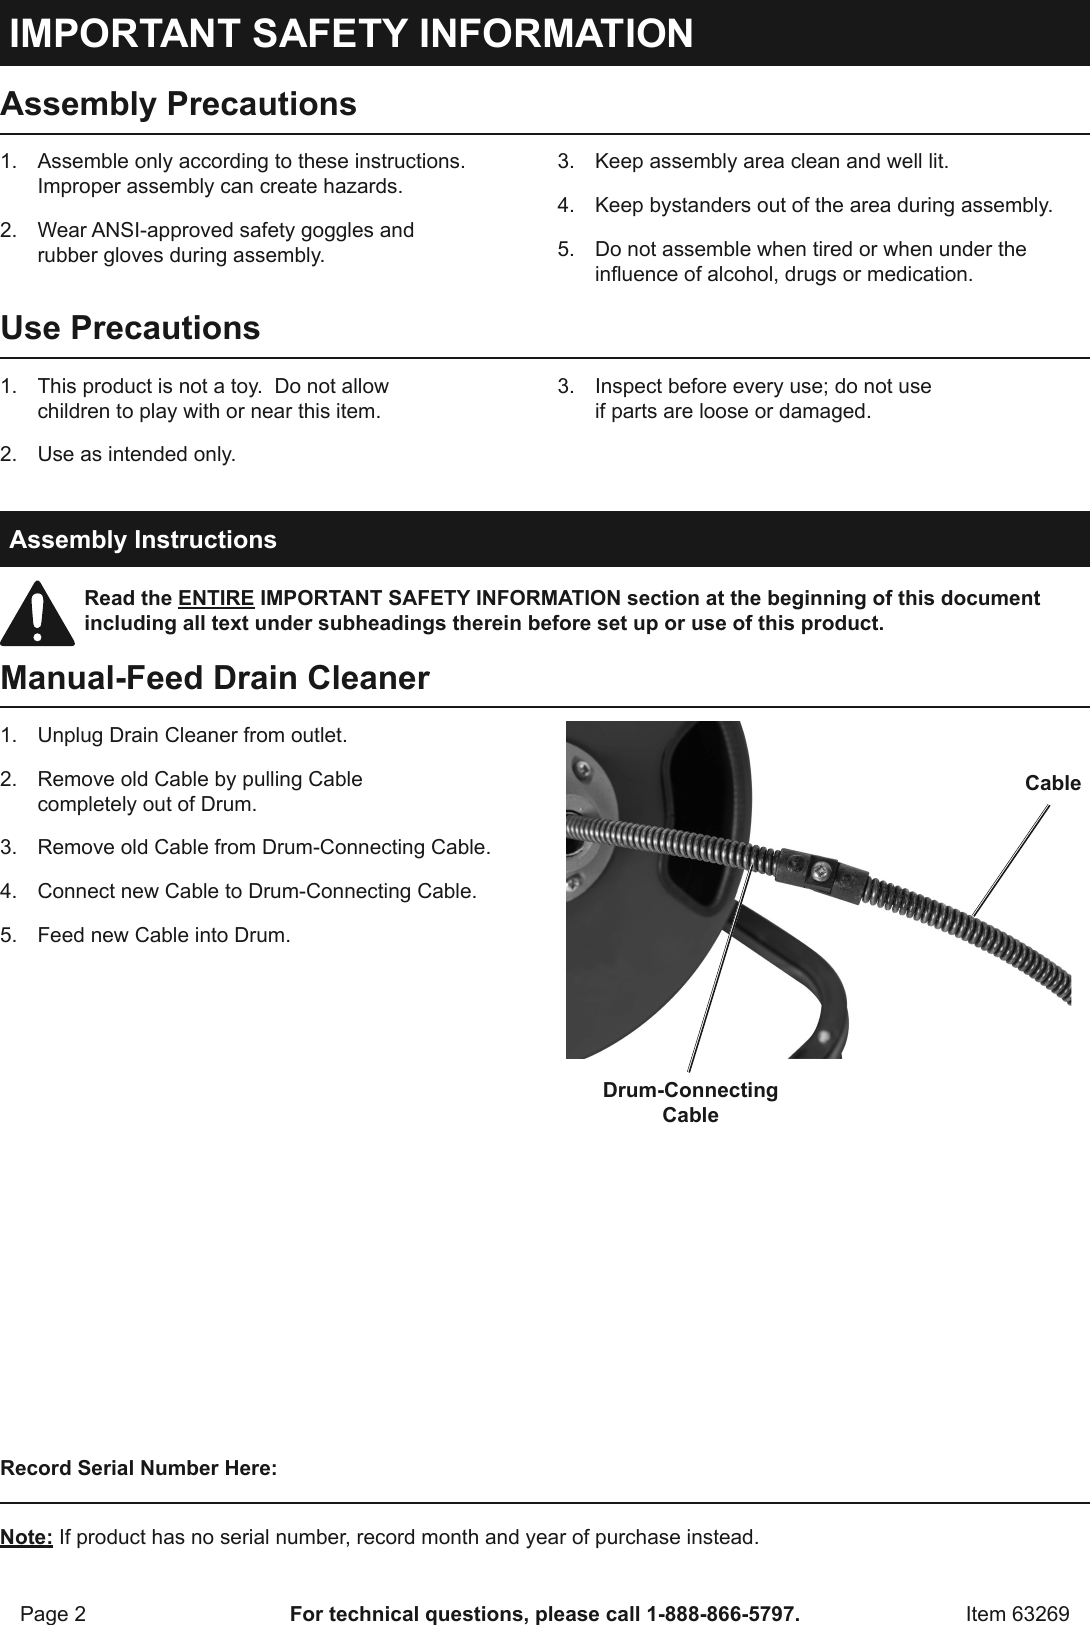 Page 2 of 4 - Manual For The 63269 Drain Cleaner Replacement Cable And Cutter Set